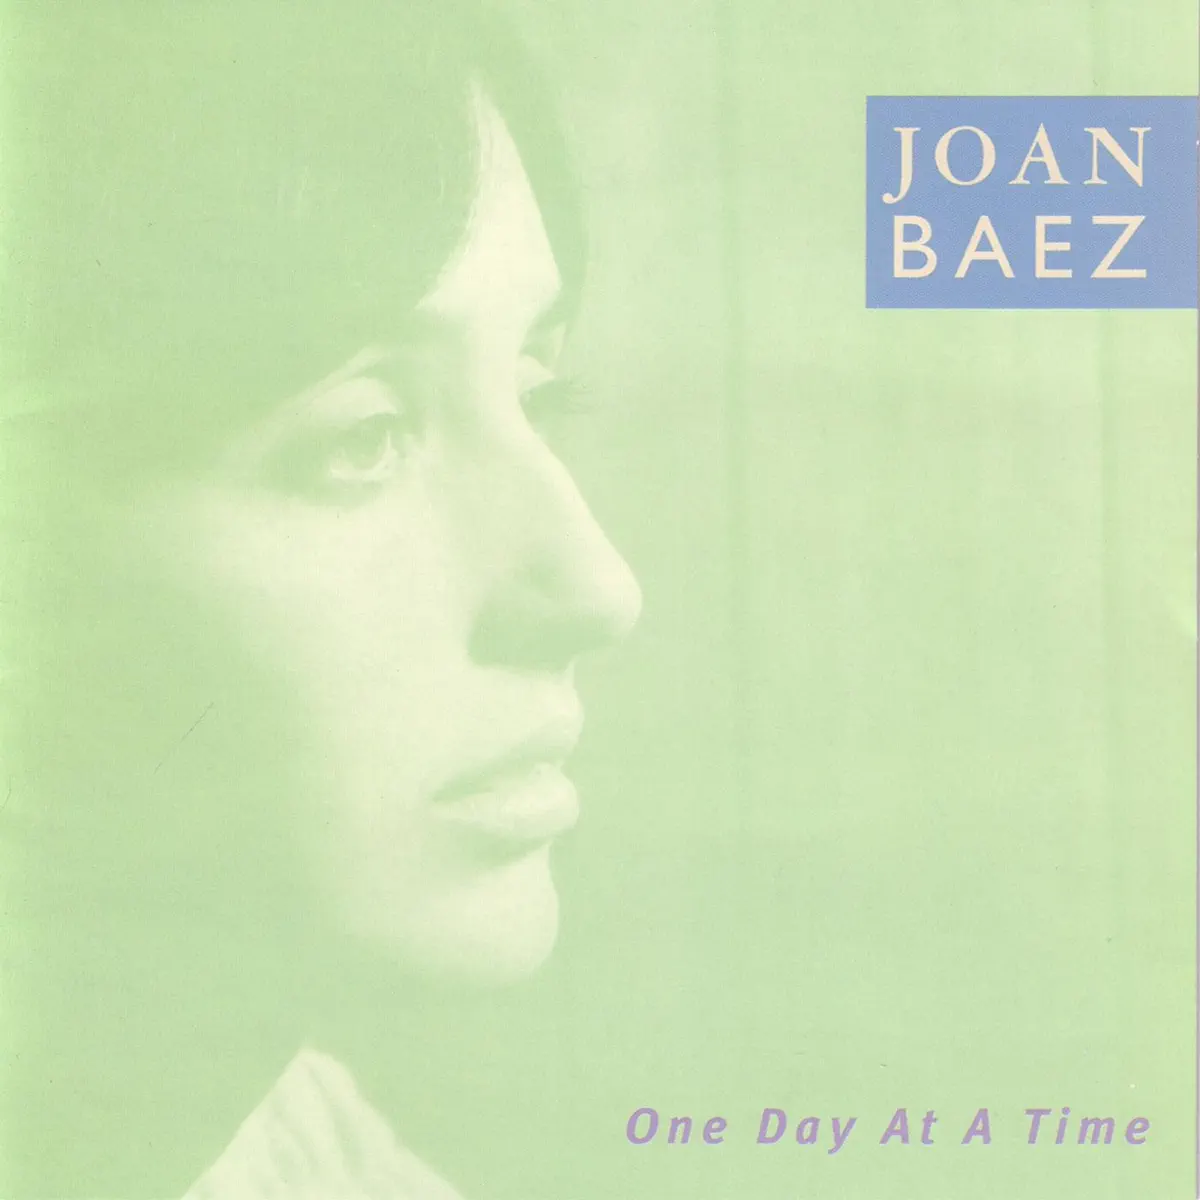 Joan Baez - One Day At a Time (2005) [iTunes Plus AAC M4A]-新房子